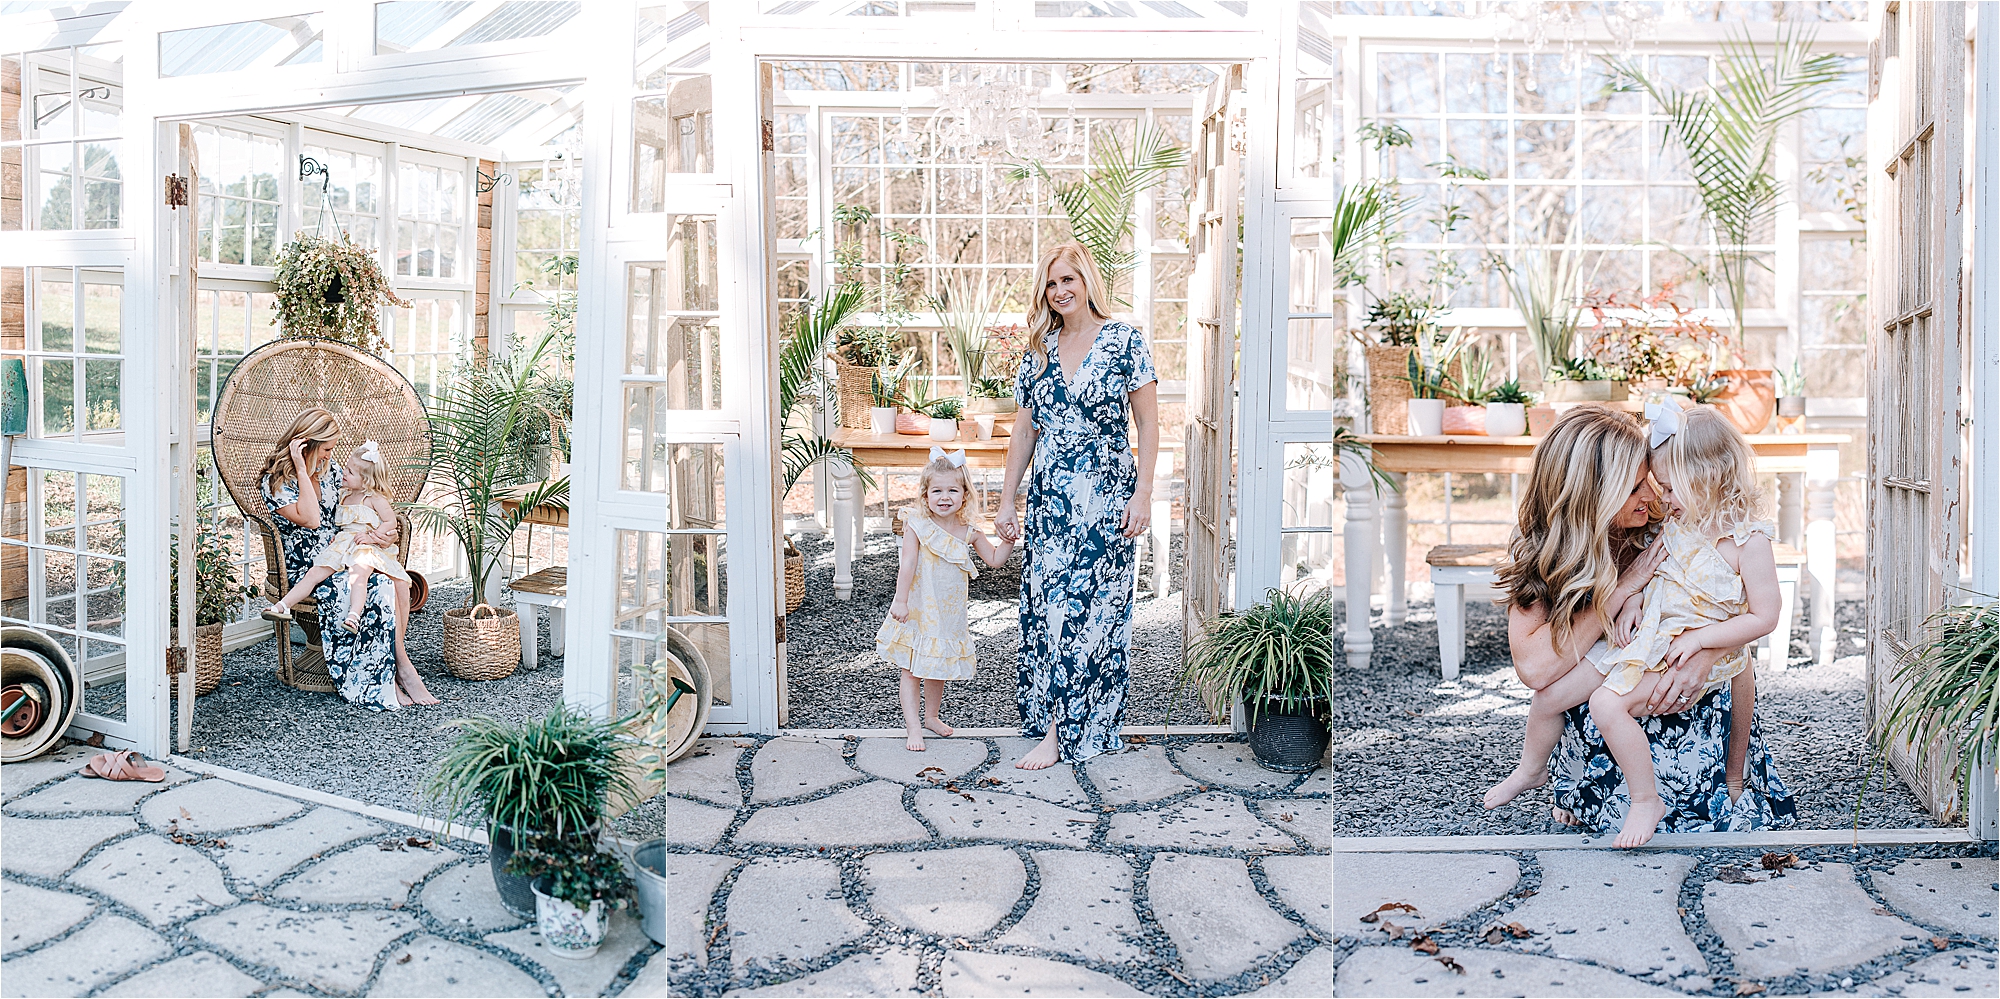 Lawrenceville greenhouse mommy & me session